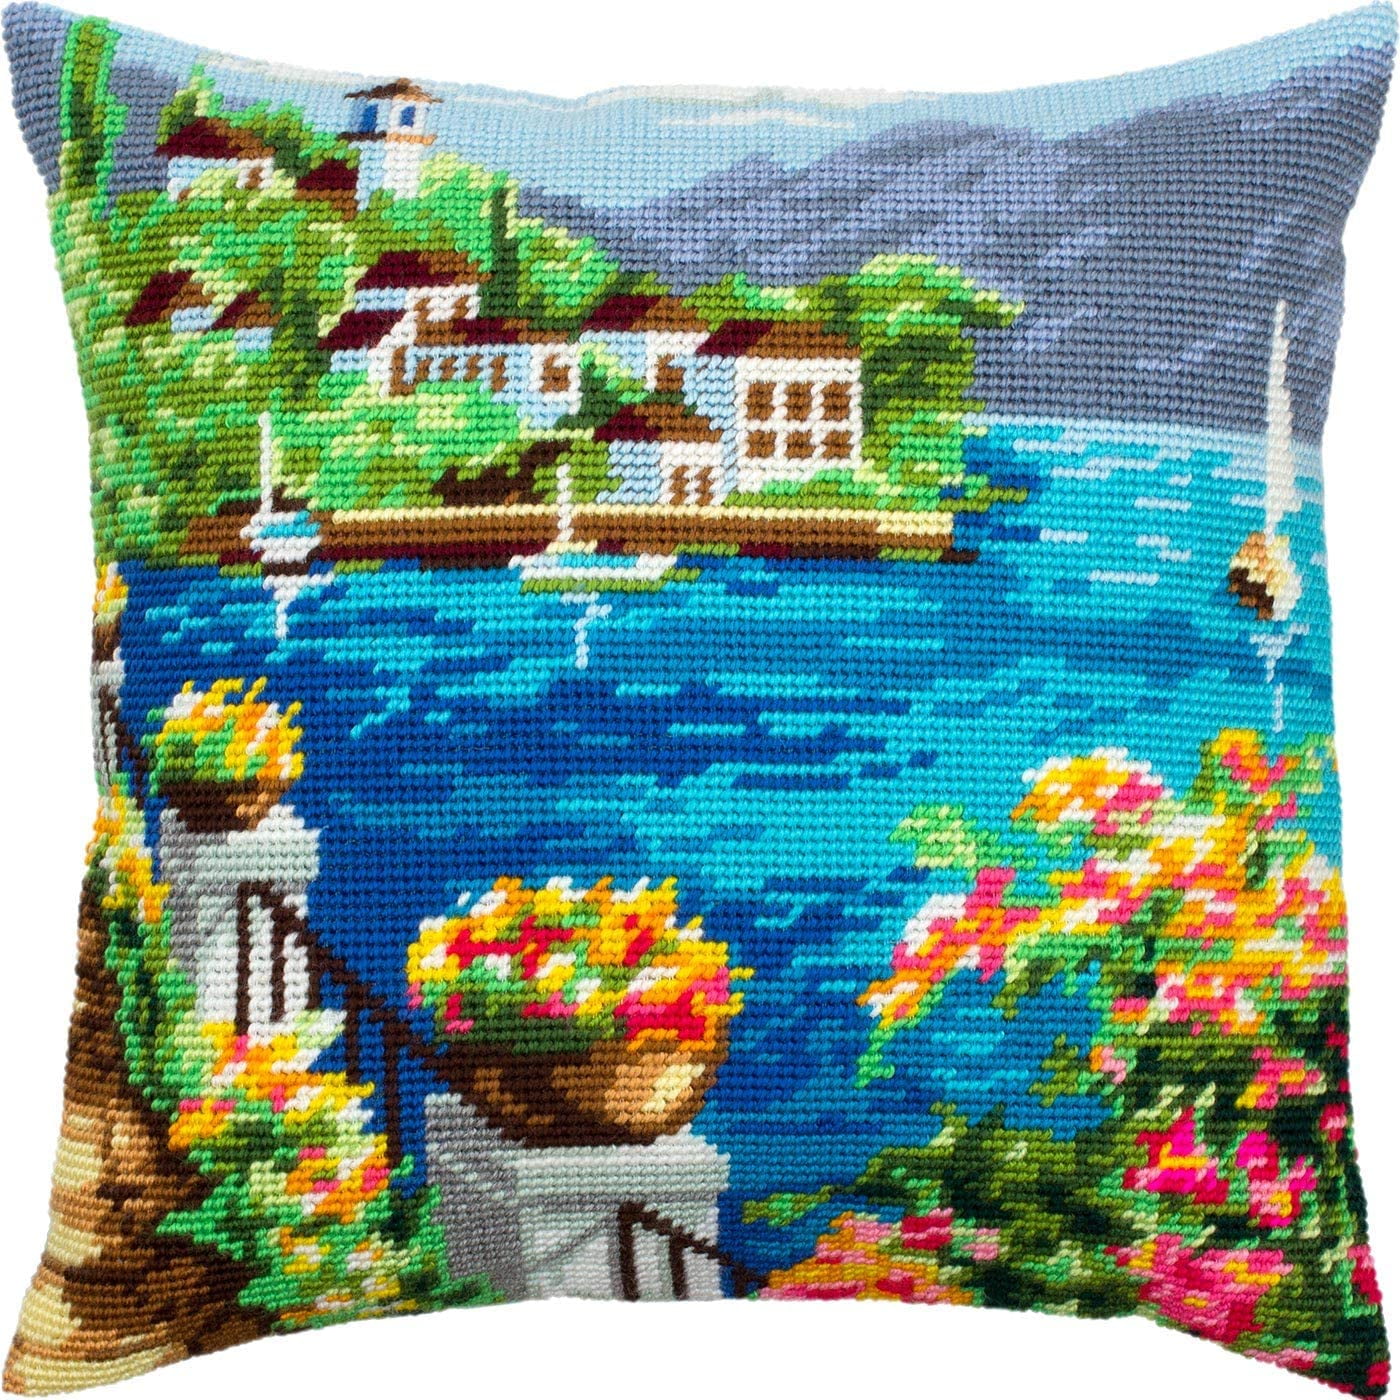 Printed Tapestry Canvas European Quality Poppies Throw Pillow 16×16 Inches Needlepoint Kit 